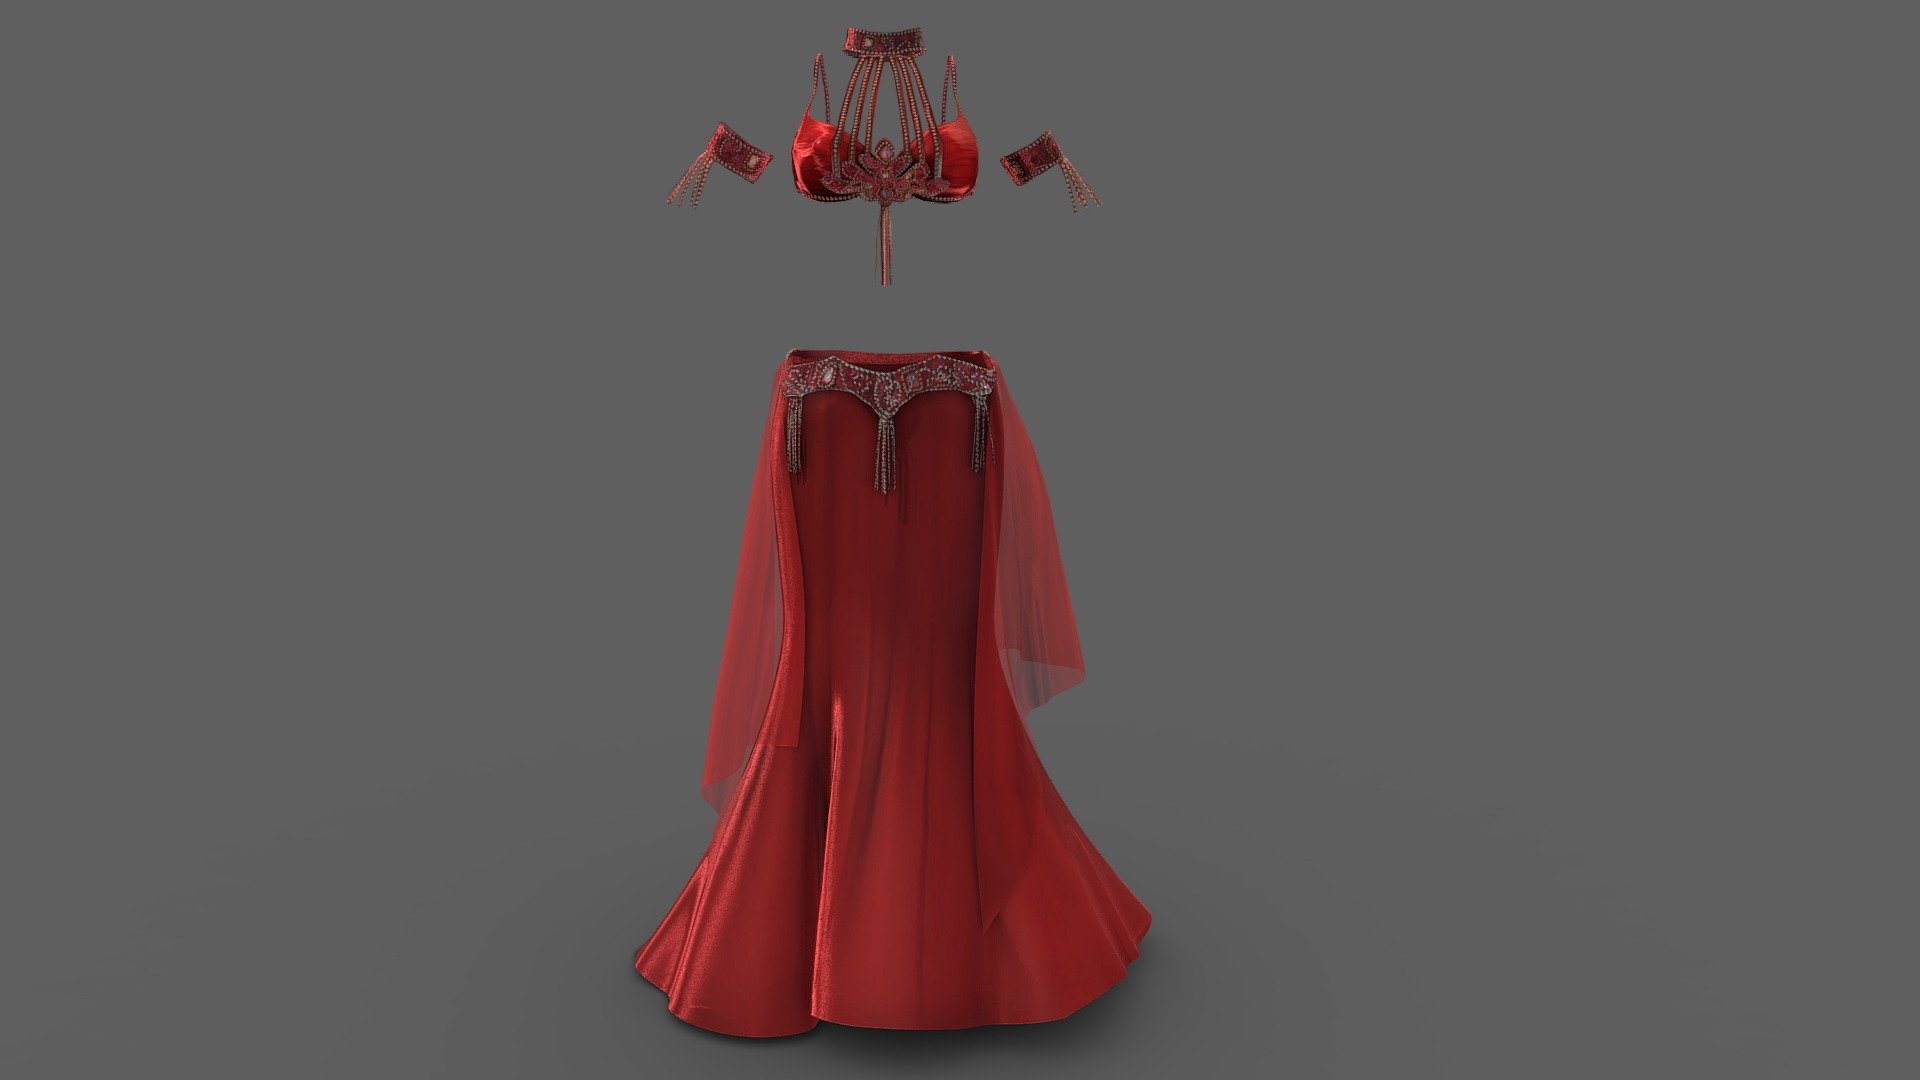 Top + Skirt

Can be fitted to any character

Clean topology

No overlapping smart optimum unwrapped UVs

High-quality realistic textures

FBX, OBJ, gITF, USDZ (request other formats)

PBR or Classic

Please ask any other questions.

Type     user:3dia &ldquo;search term